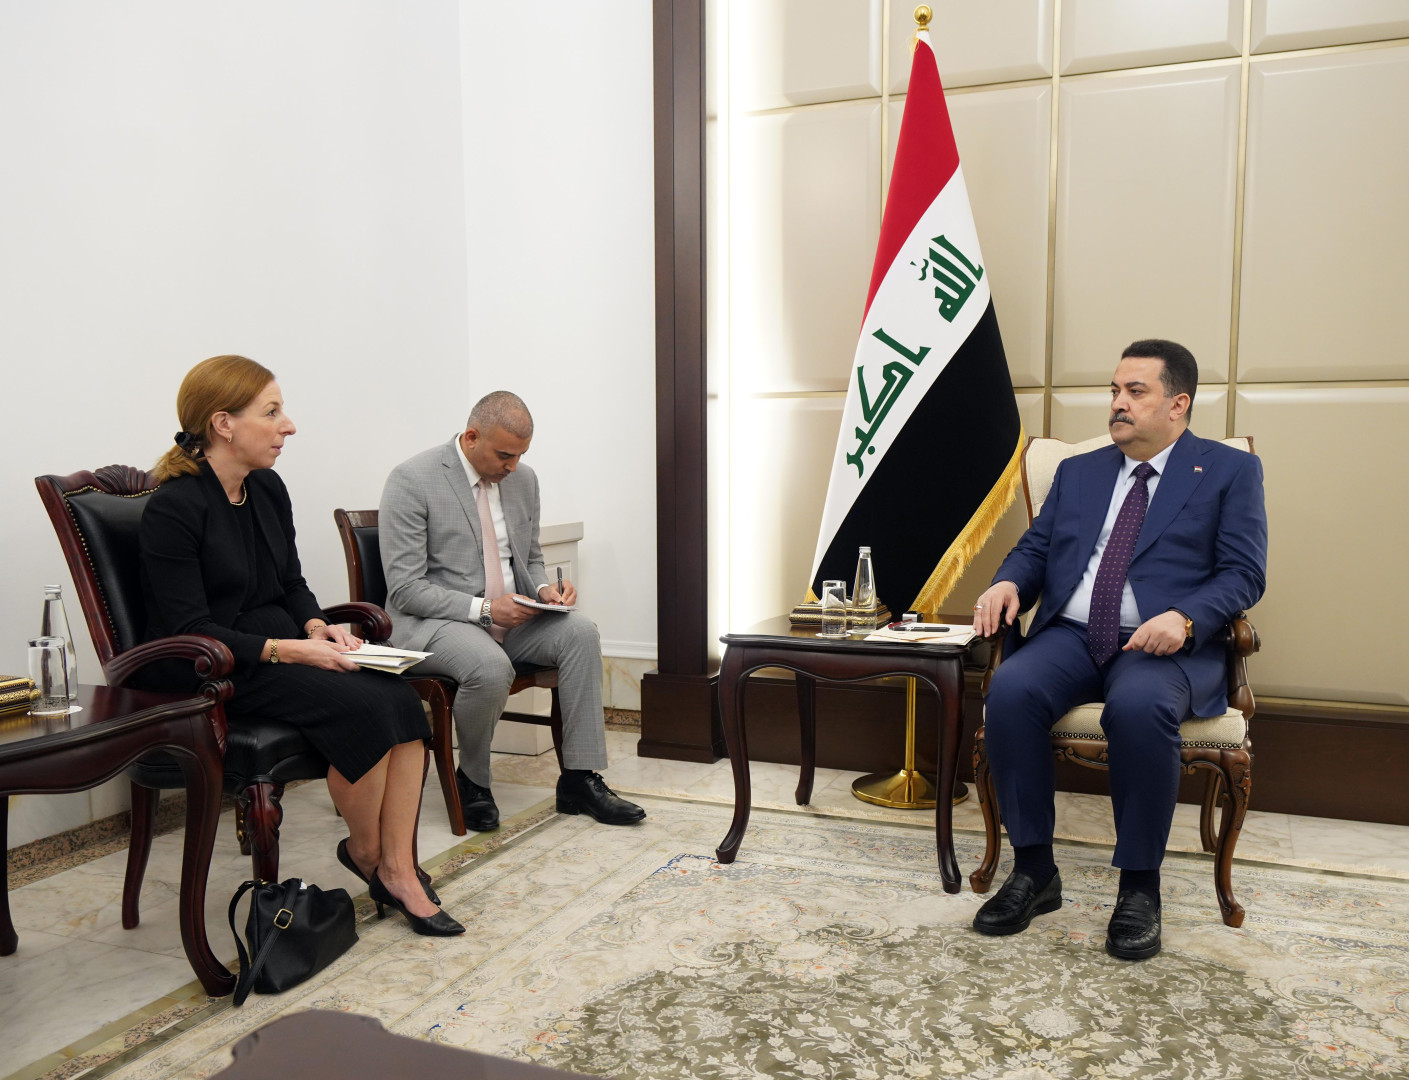 Al-Sudani commends banking sector reforms in meeting with U.S. official